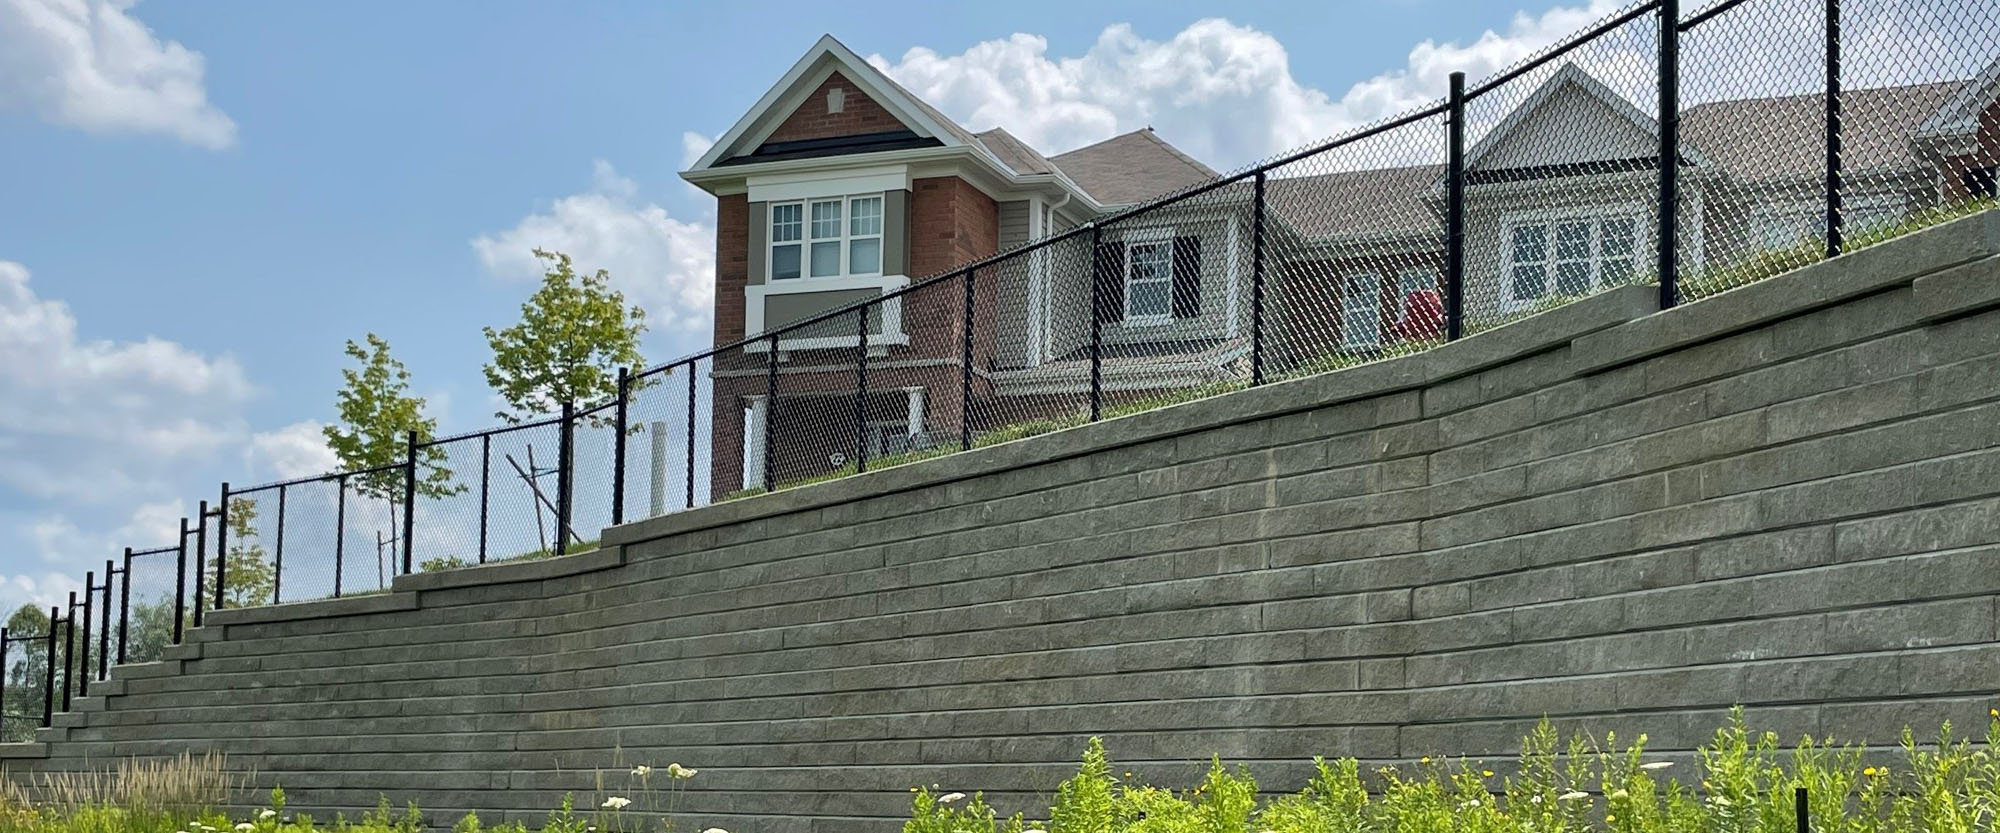 Retaining wall built around subdivision with fence